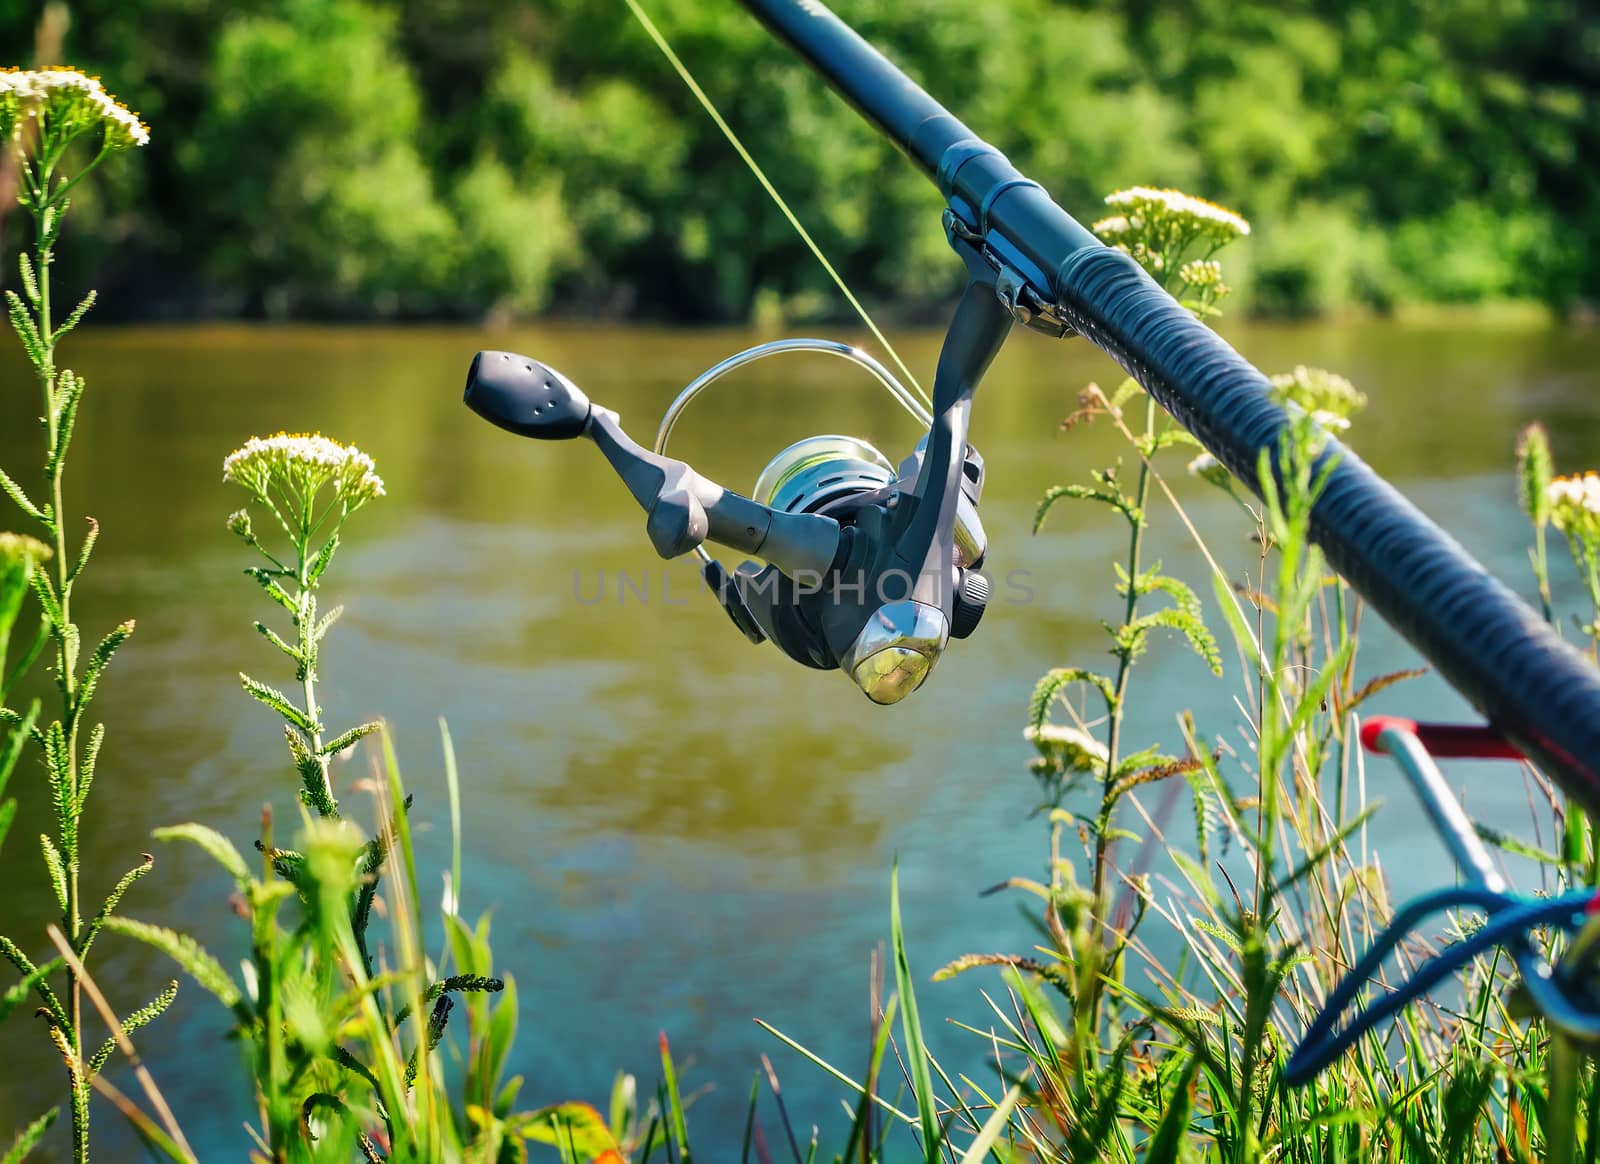 On the banks of the beautiful river above the water feeder installed - English fishing tackle for catching fish comfortable with the rod and the reel.